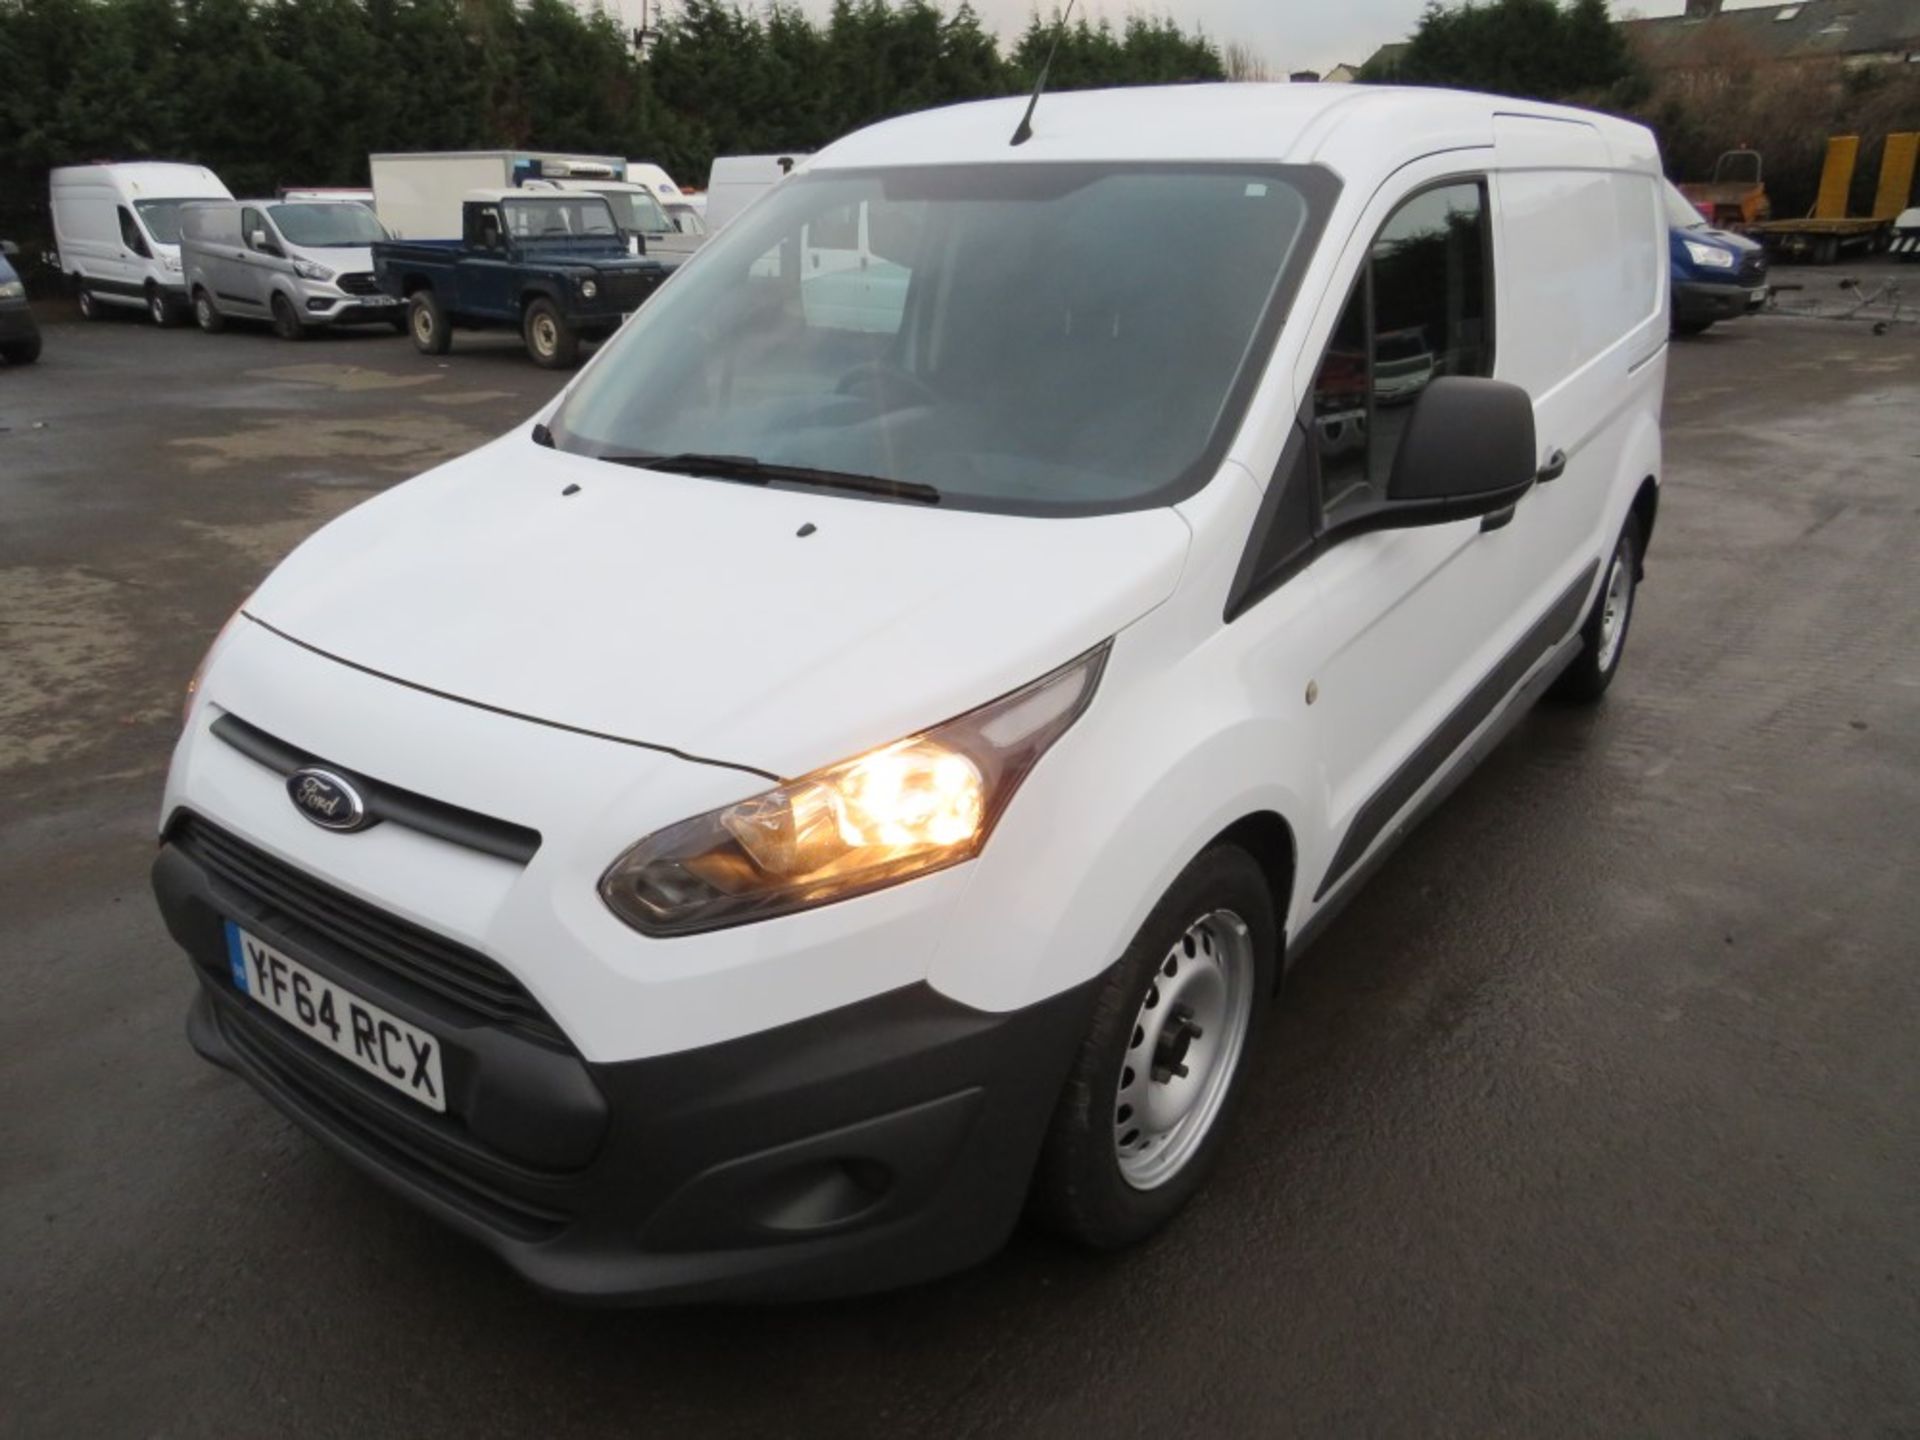 64 reg FORD TRANSIT CONNECT 210 ECO-TECH, 1ST REG 01/15, 101605M, V5 HERE, 1 OWNER FROM NEW [+ VAT] - Image 2 of 6